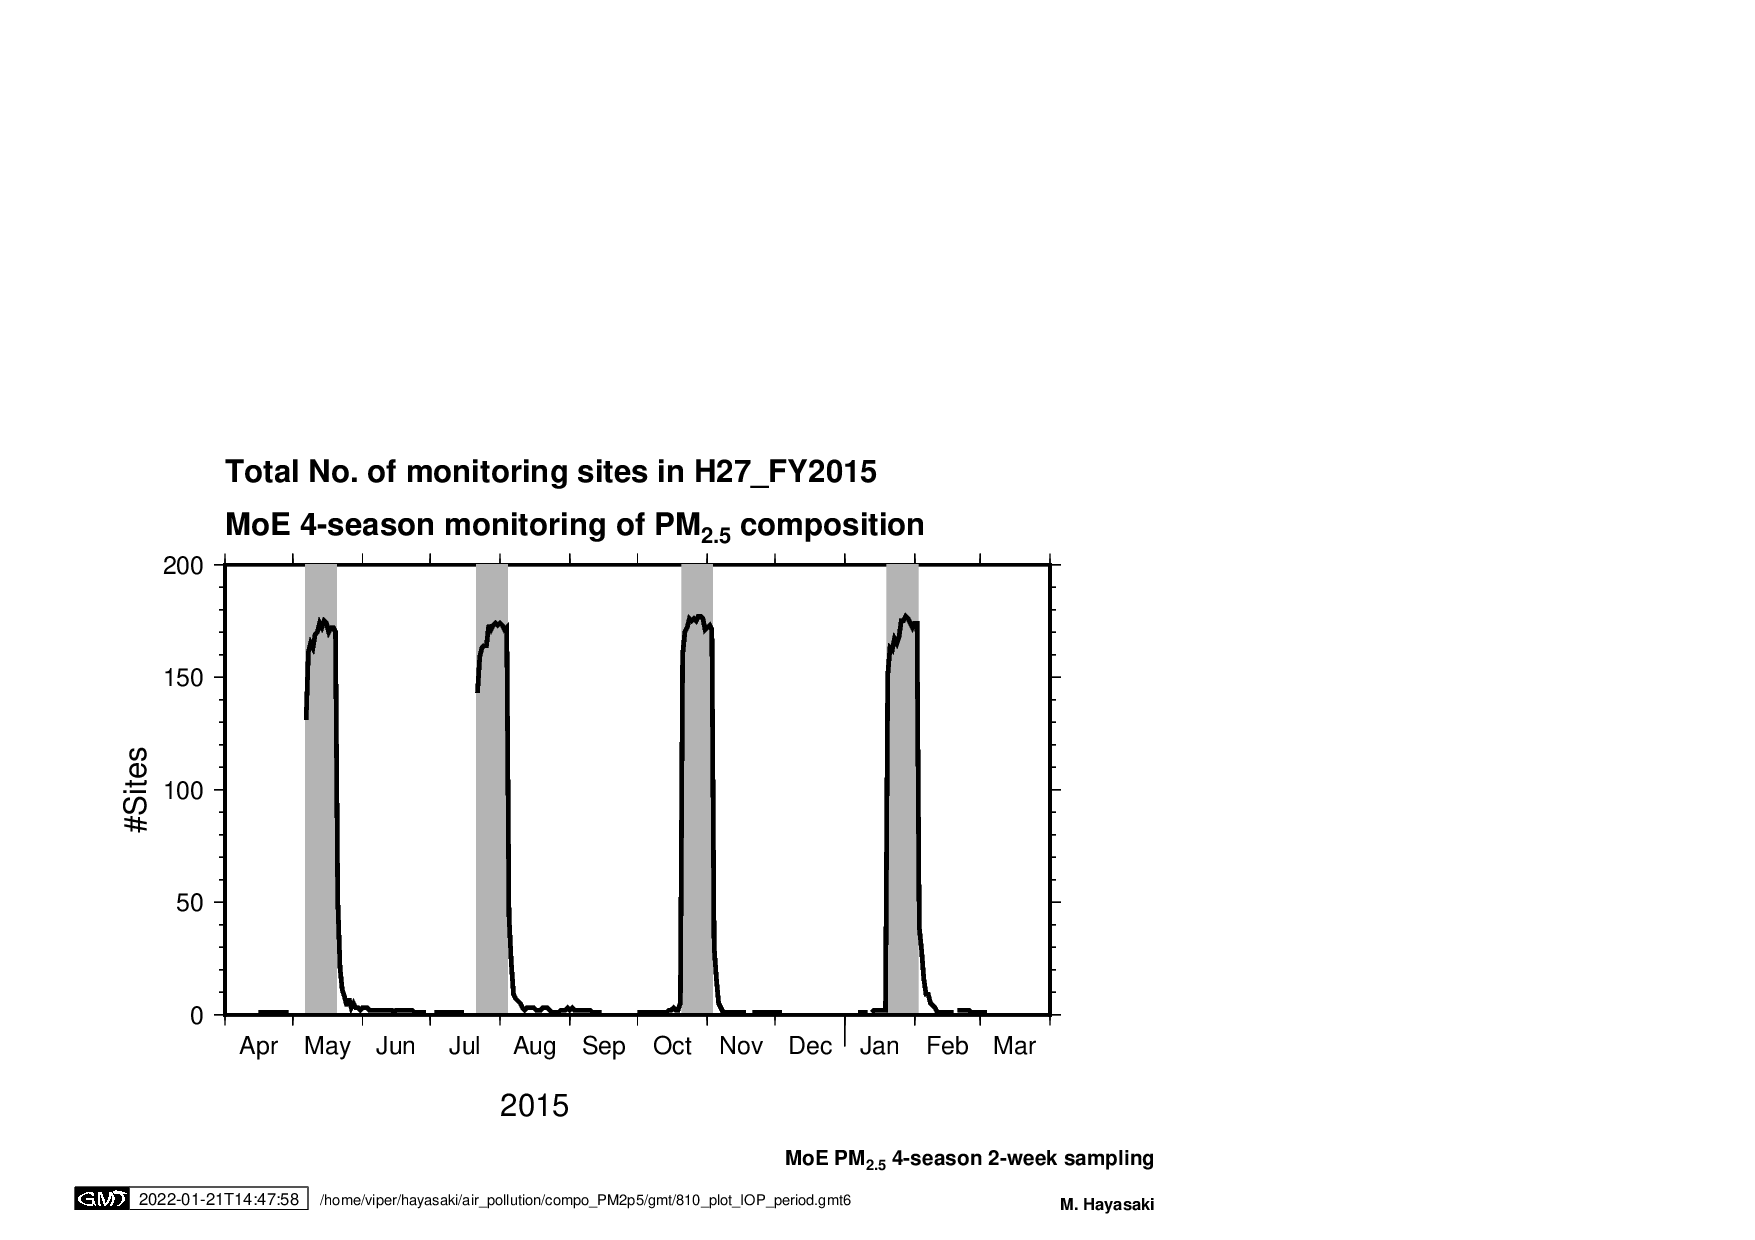 #sites for PM2.5 composition anal in Japan, FY2015 (H27)